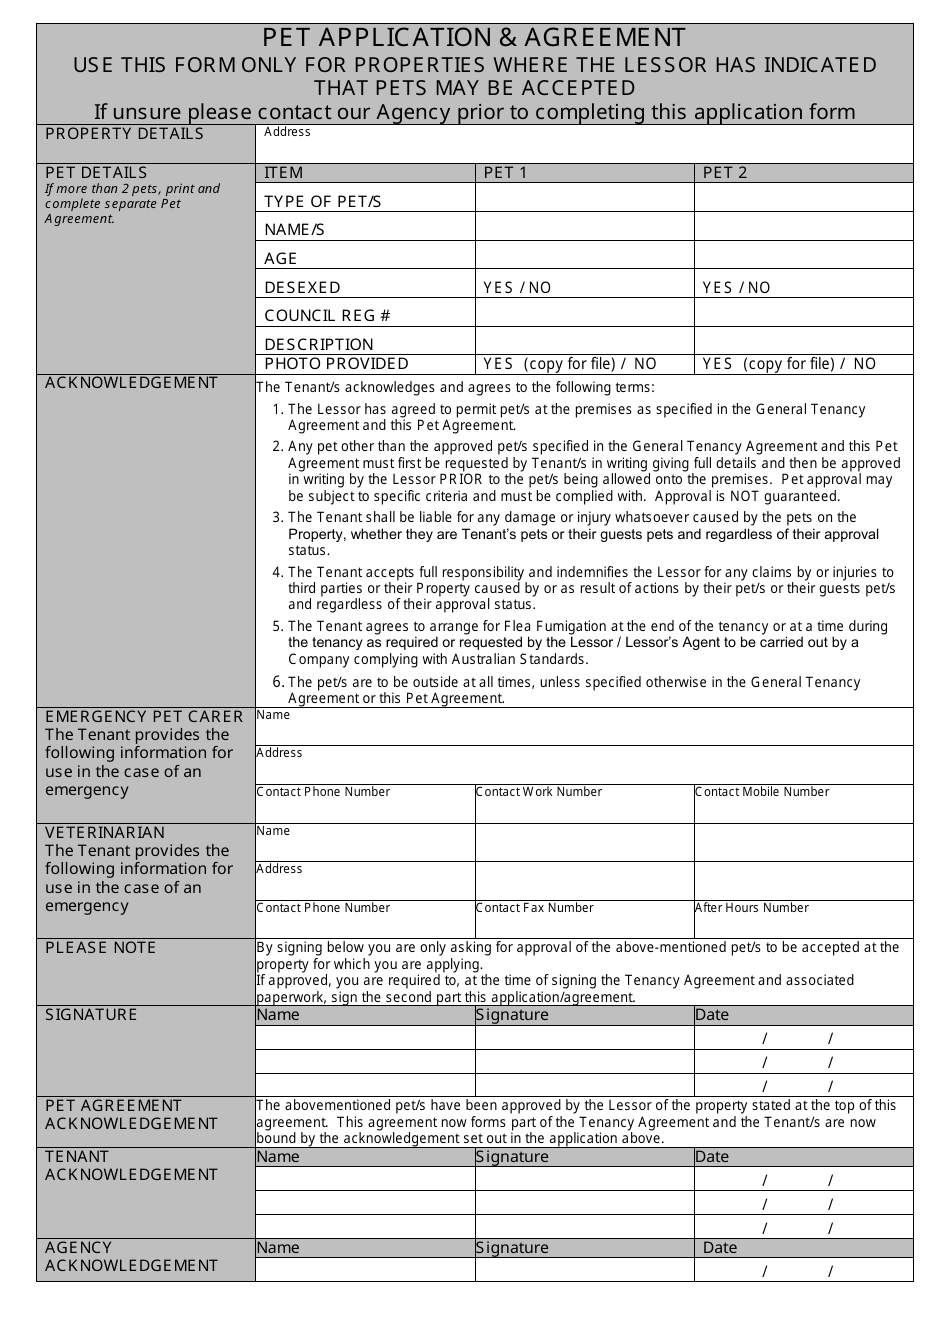 Pet Application  Agreement Form, Page 1